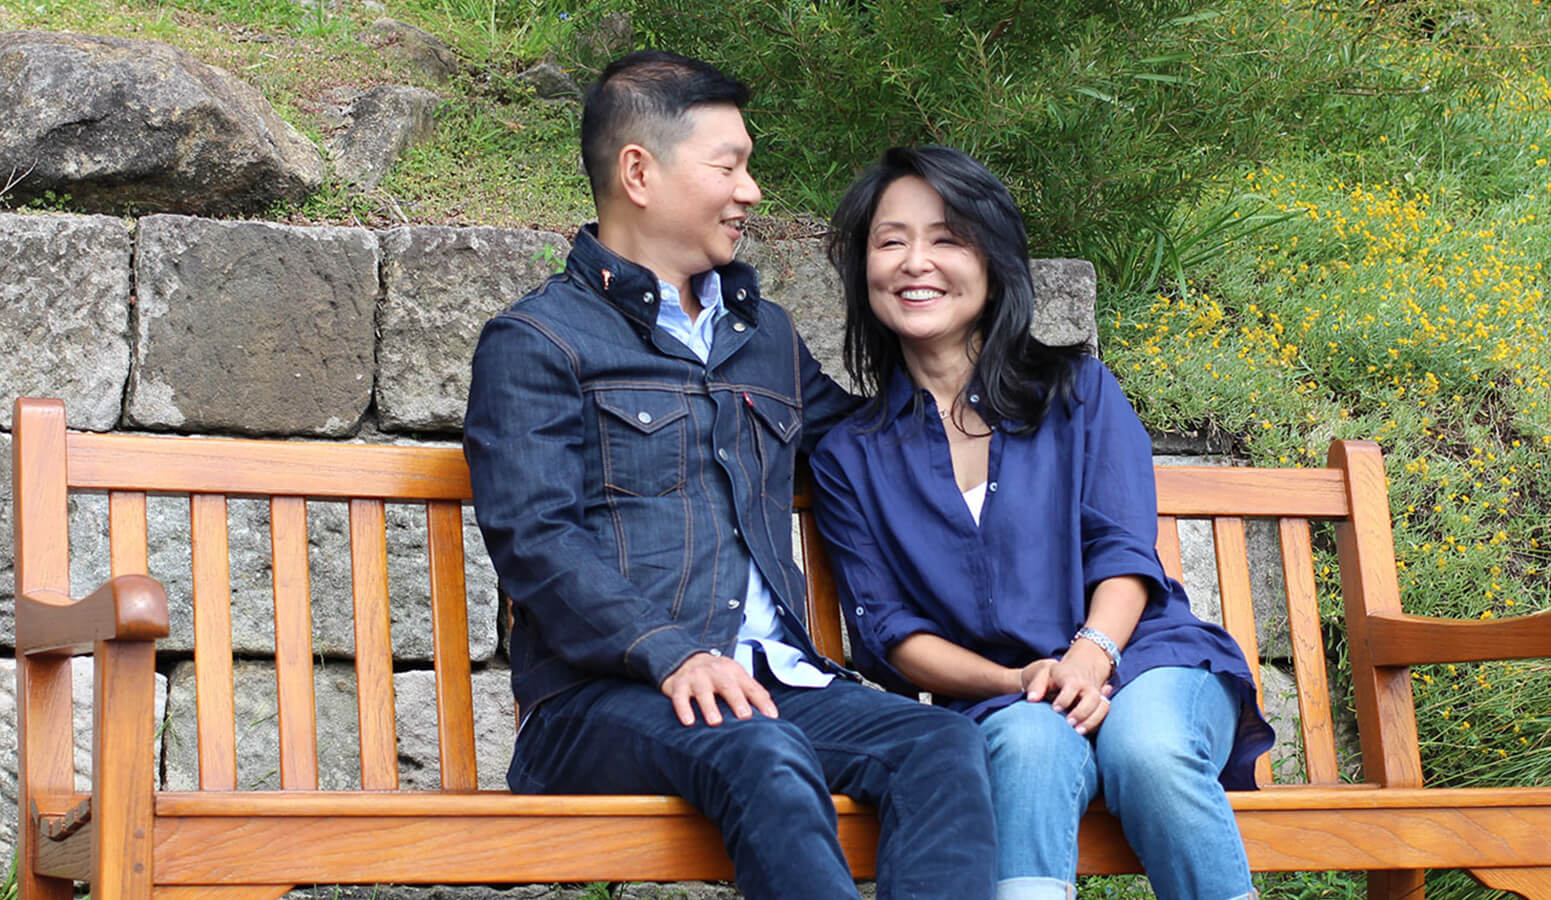 two people sitting on a bench smiling